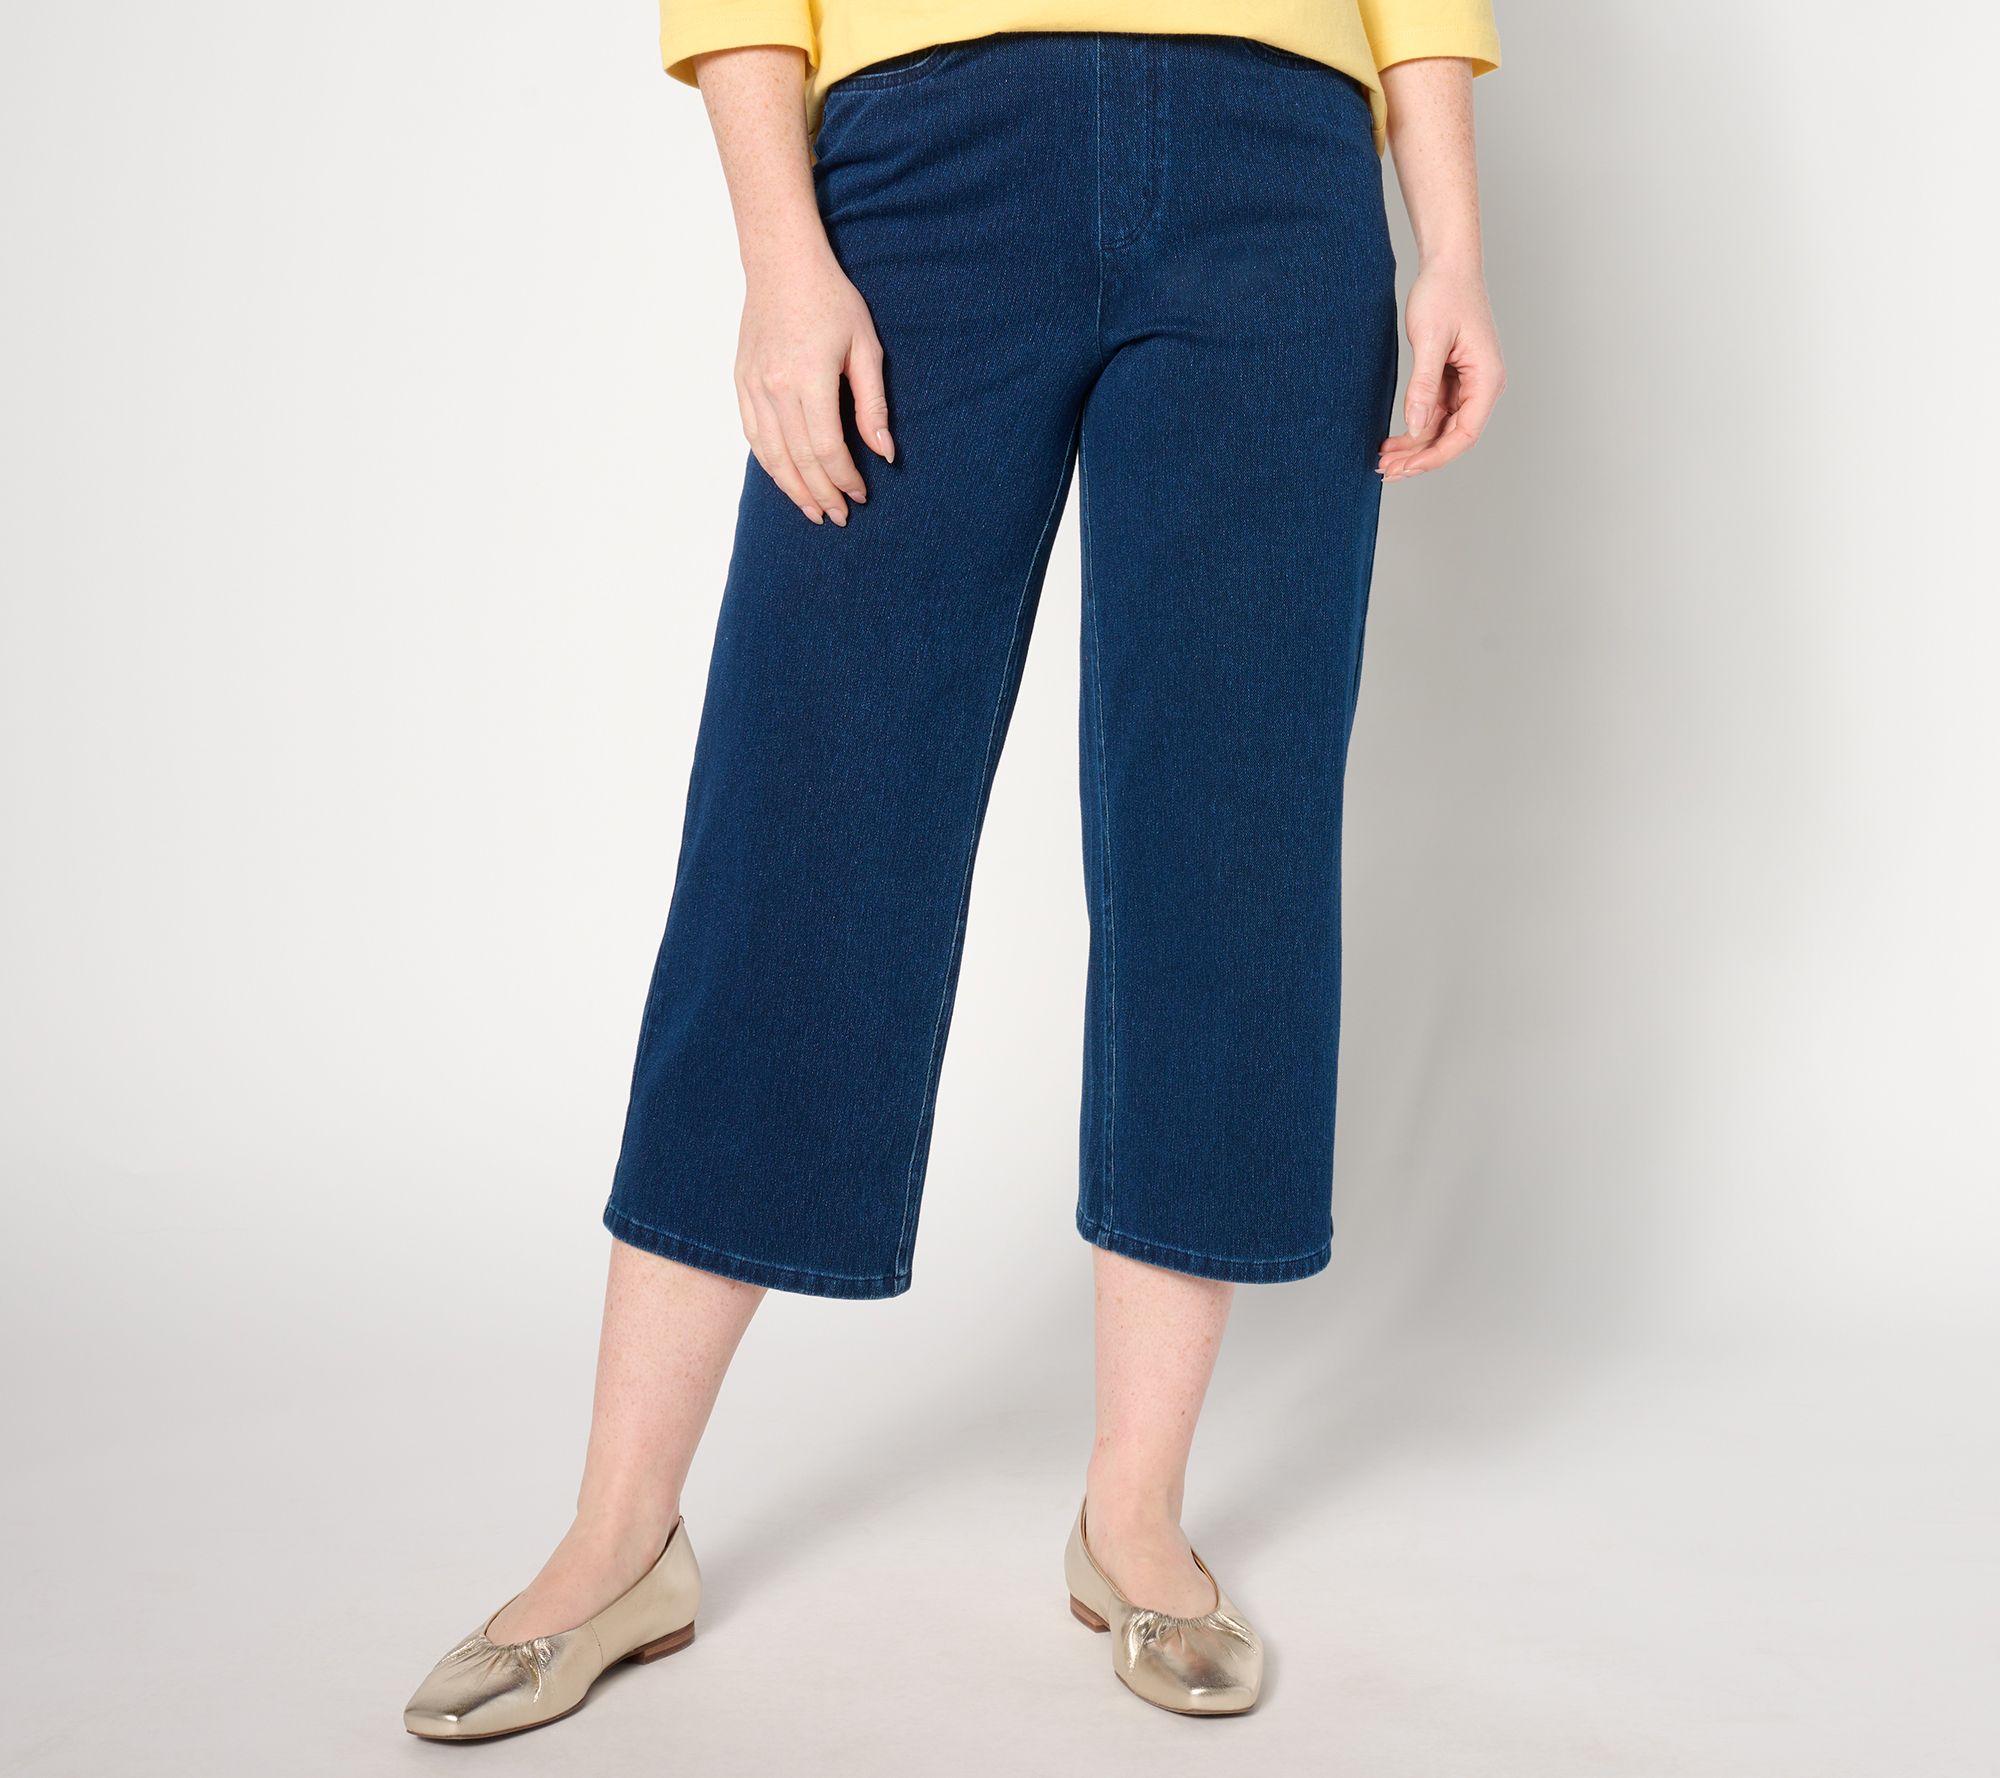 Denim & Co. Comfy Knit Air RegularStraight Crop Pant with Side Slits